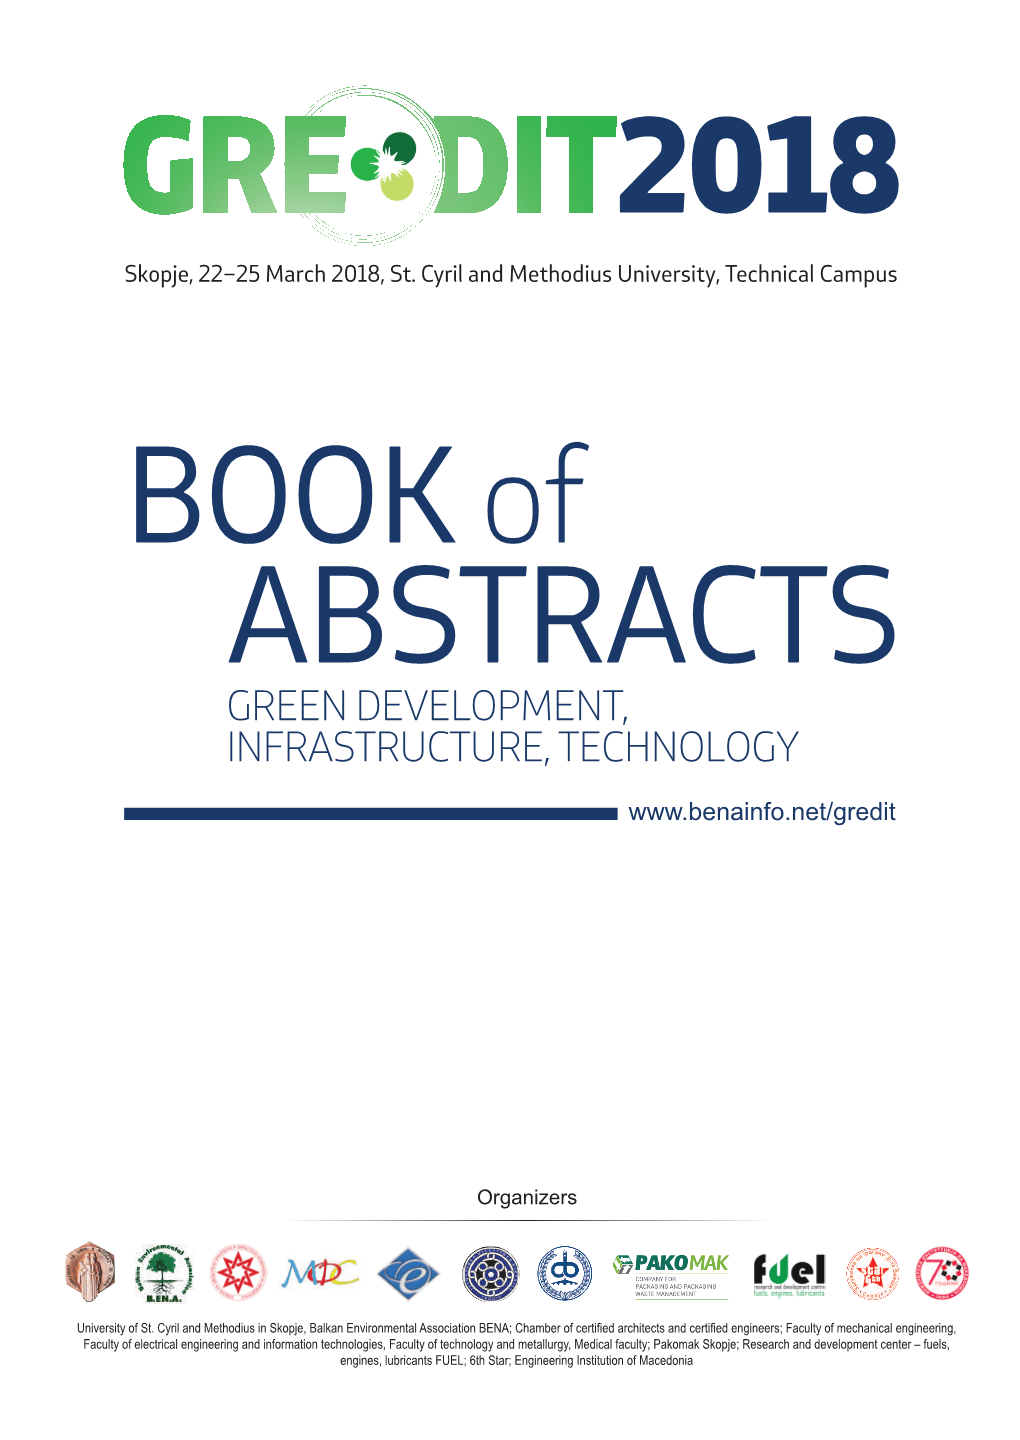 BOOK of ABSTRACTS GREEN DEVELOPMENT, INFRASTRUCTURE, TECHNOLOGY